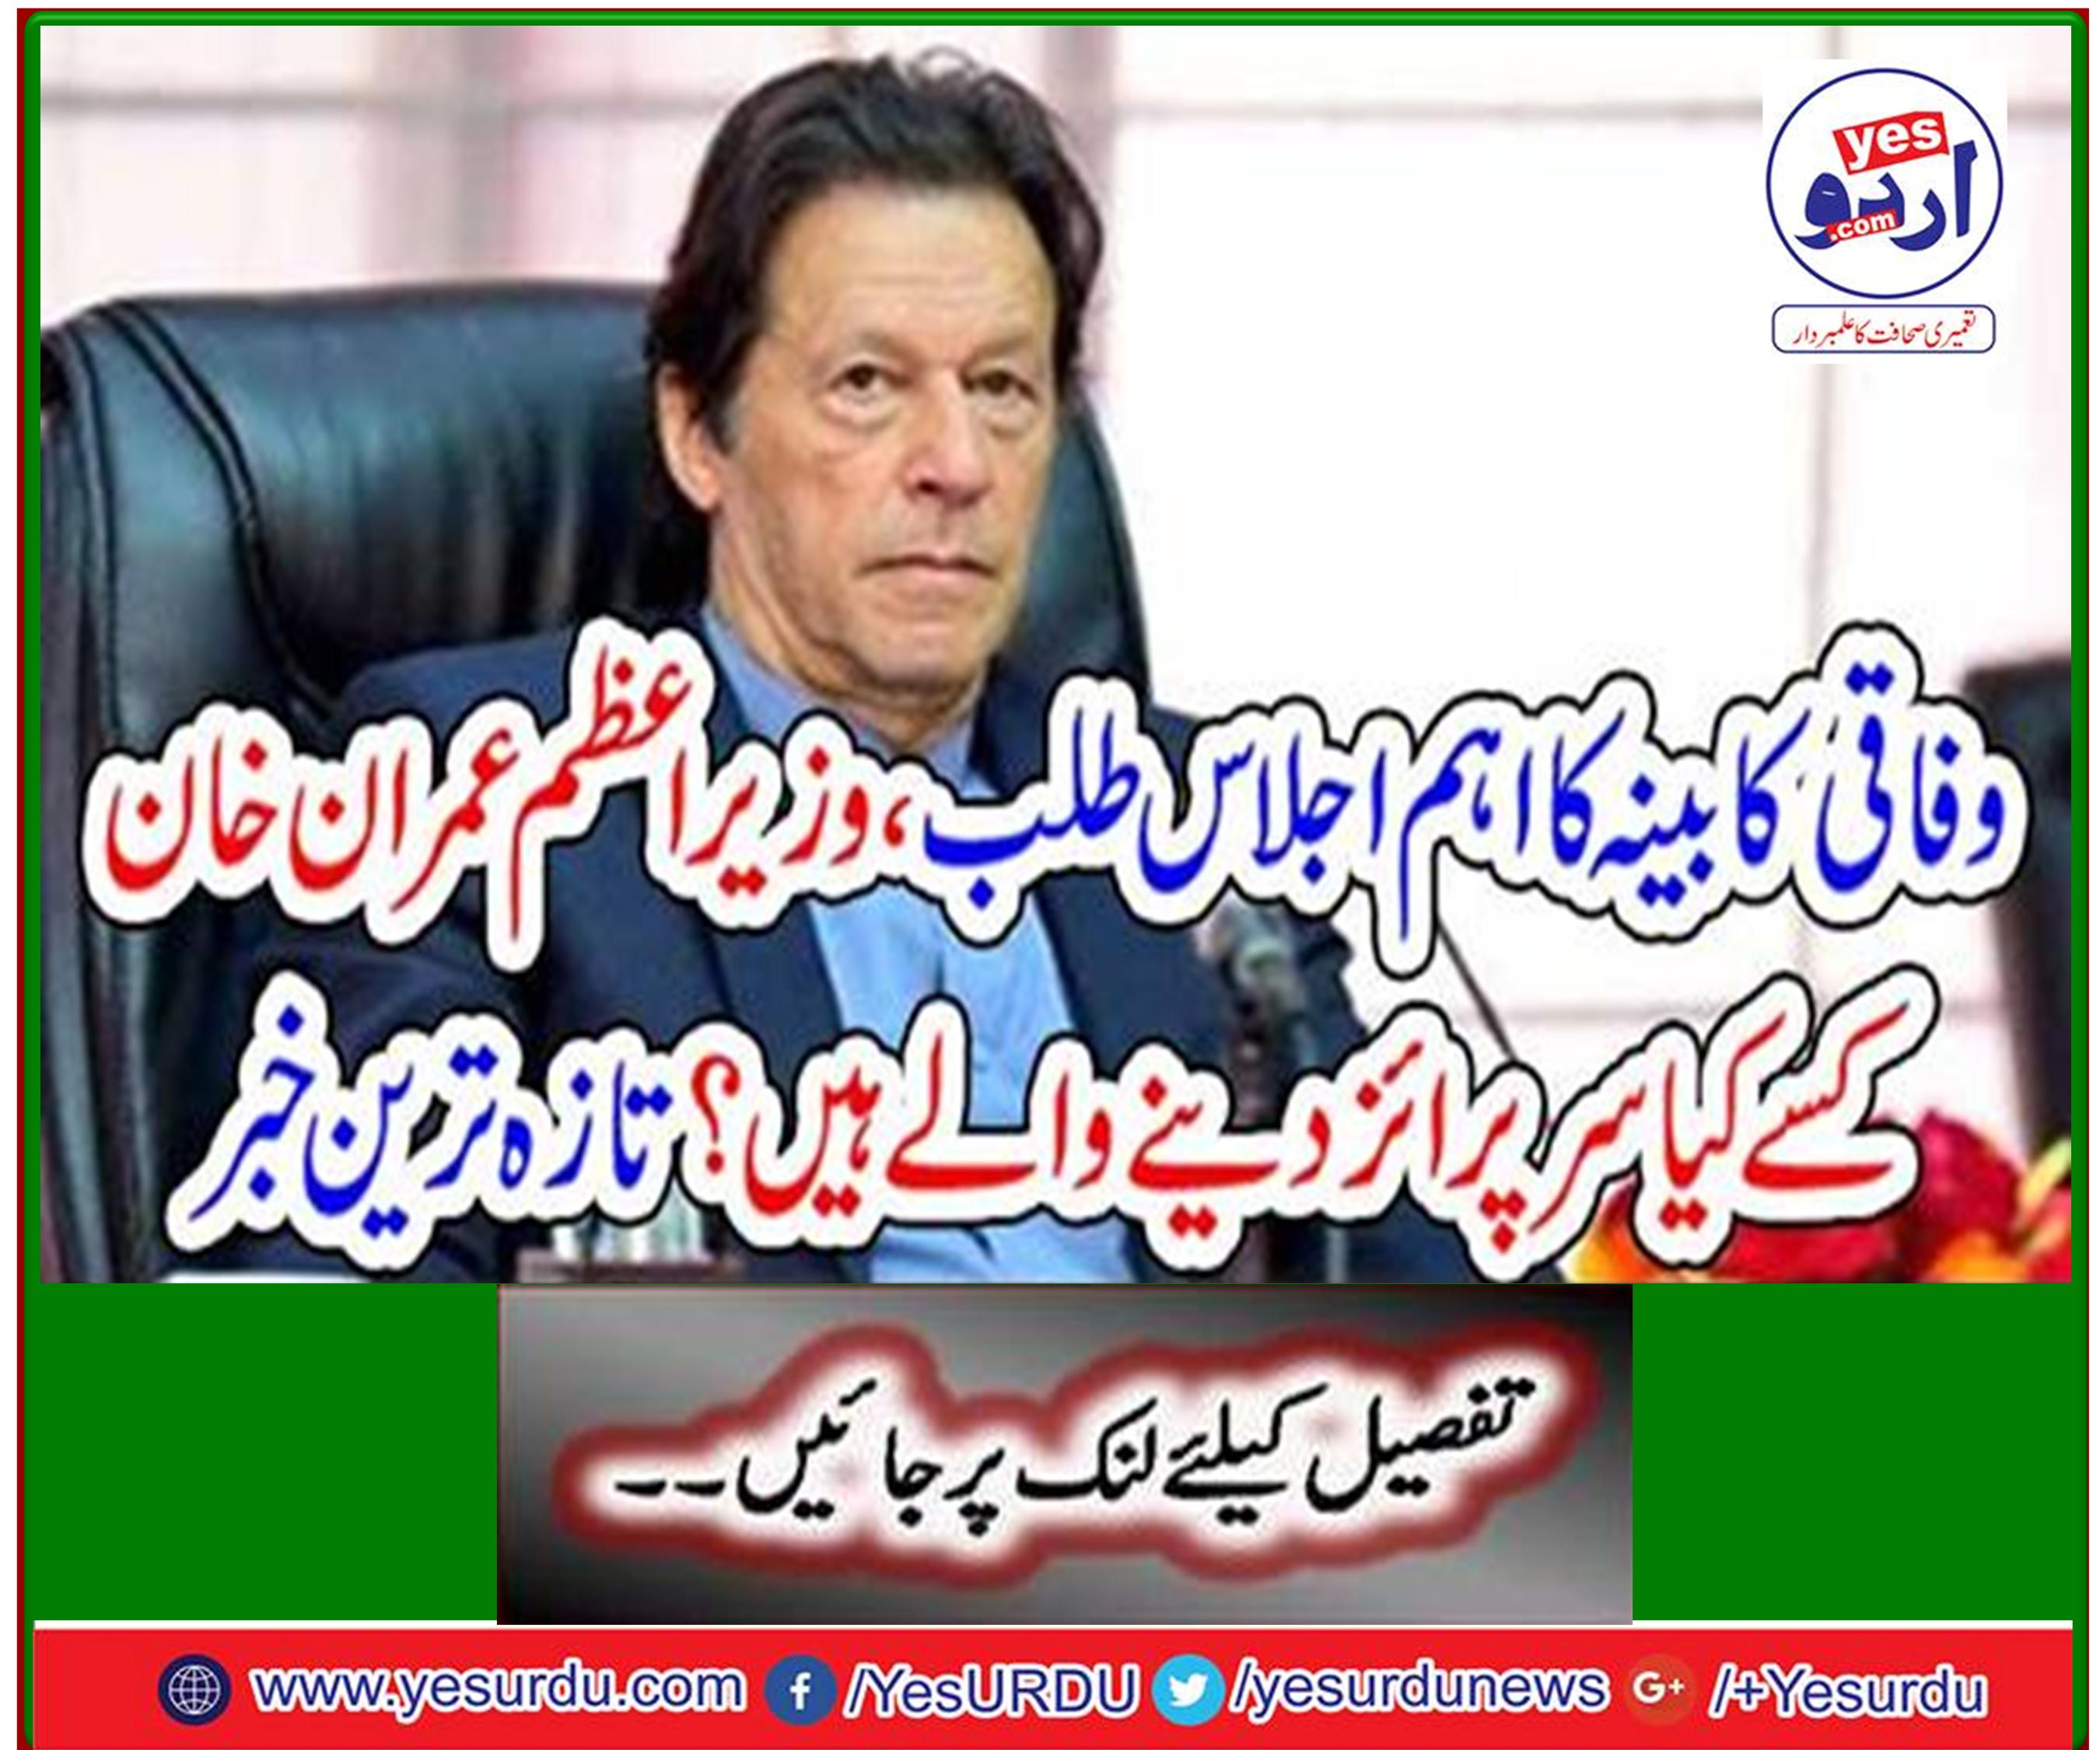 Imran Khan, the prime minister of the Cabinet meeting, is asking for what? Latest news